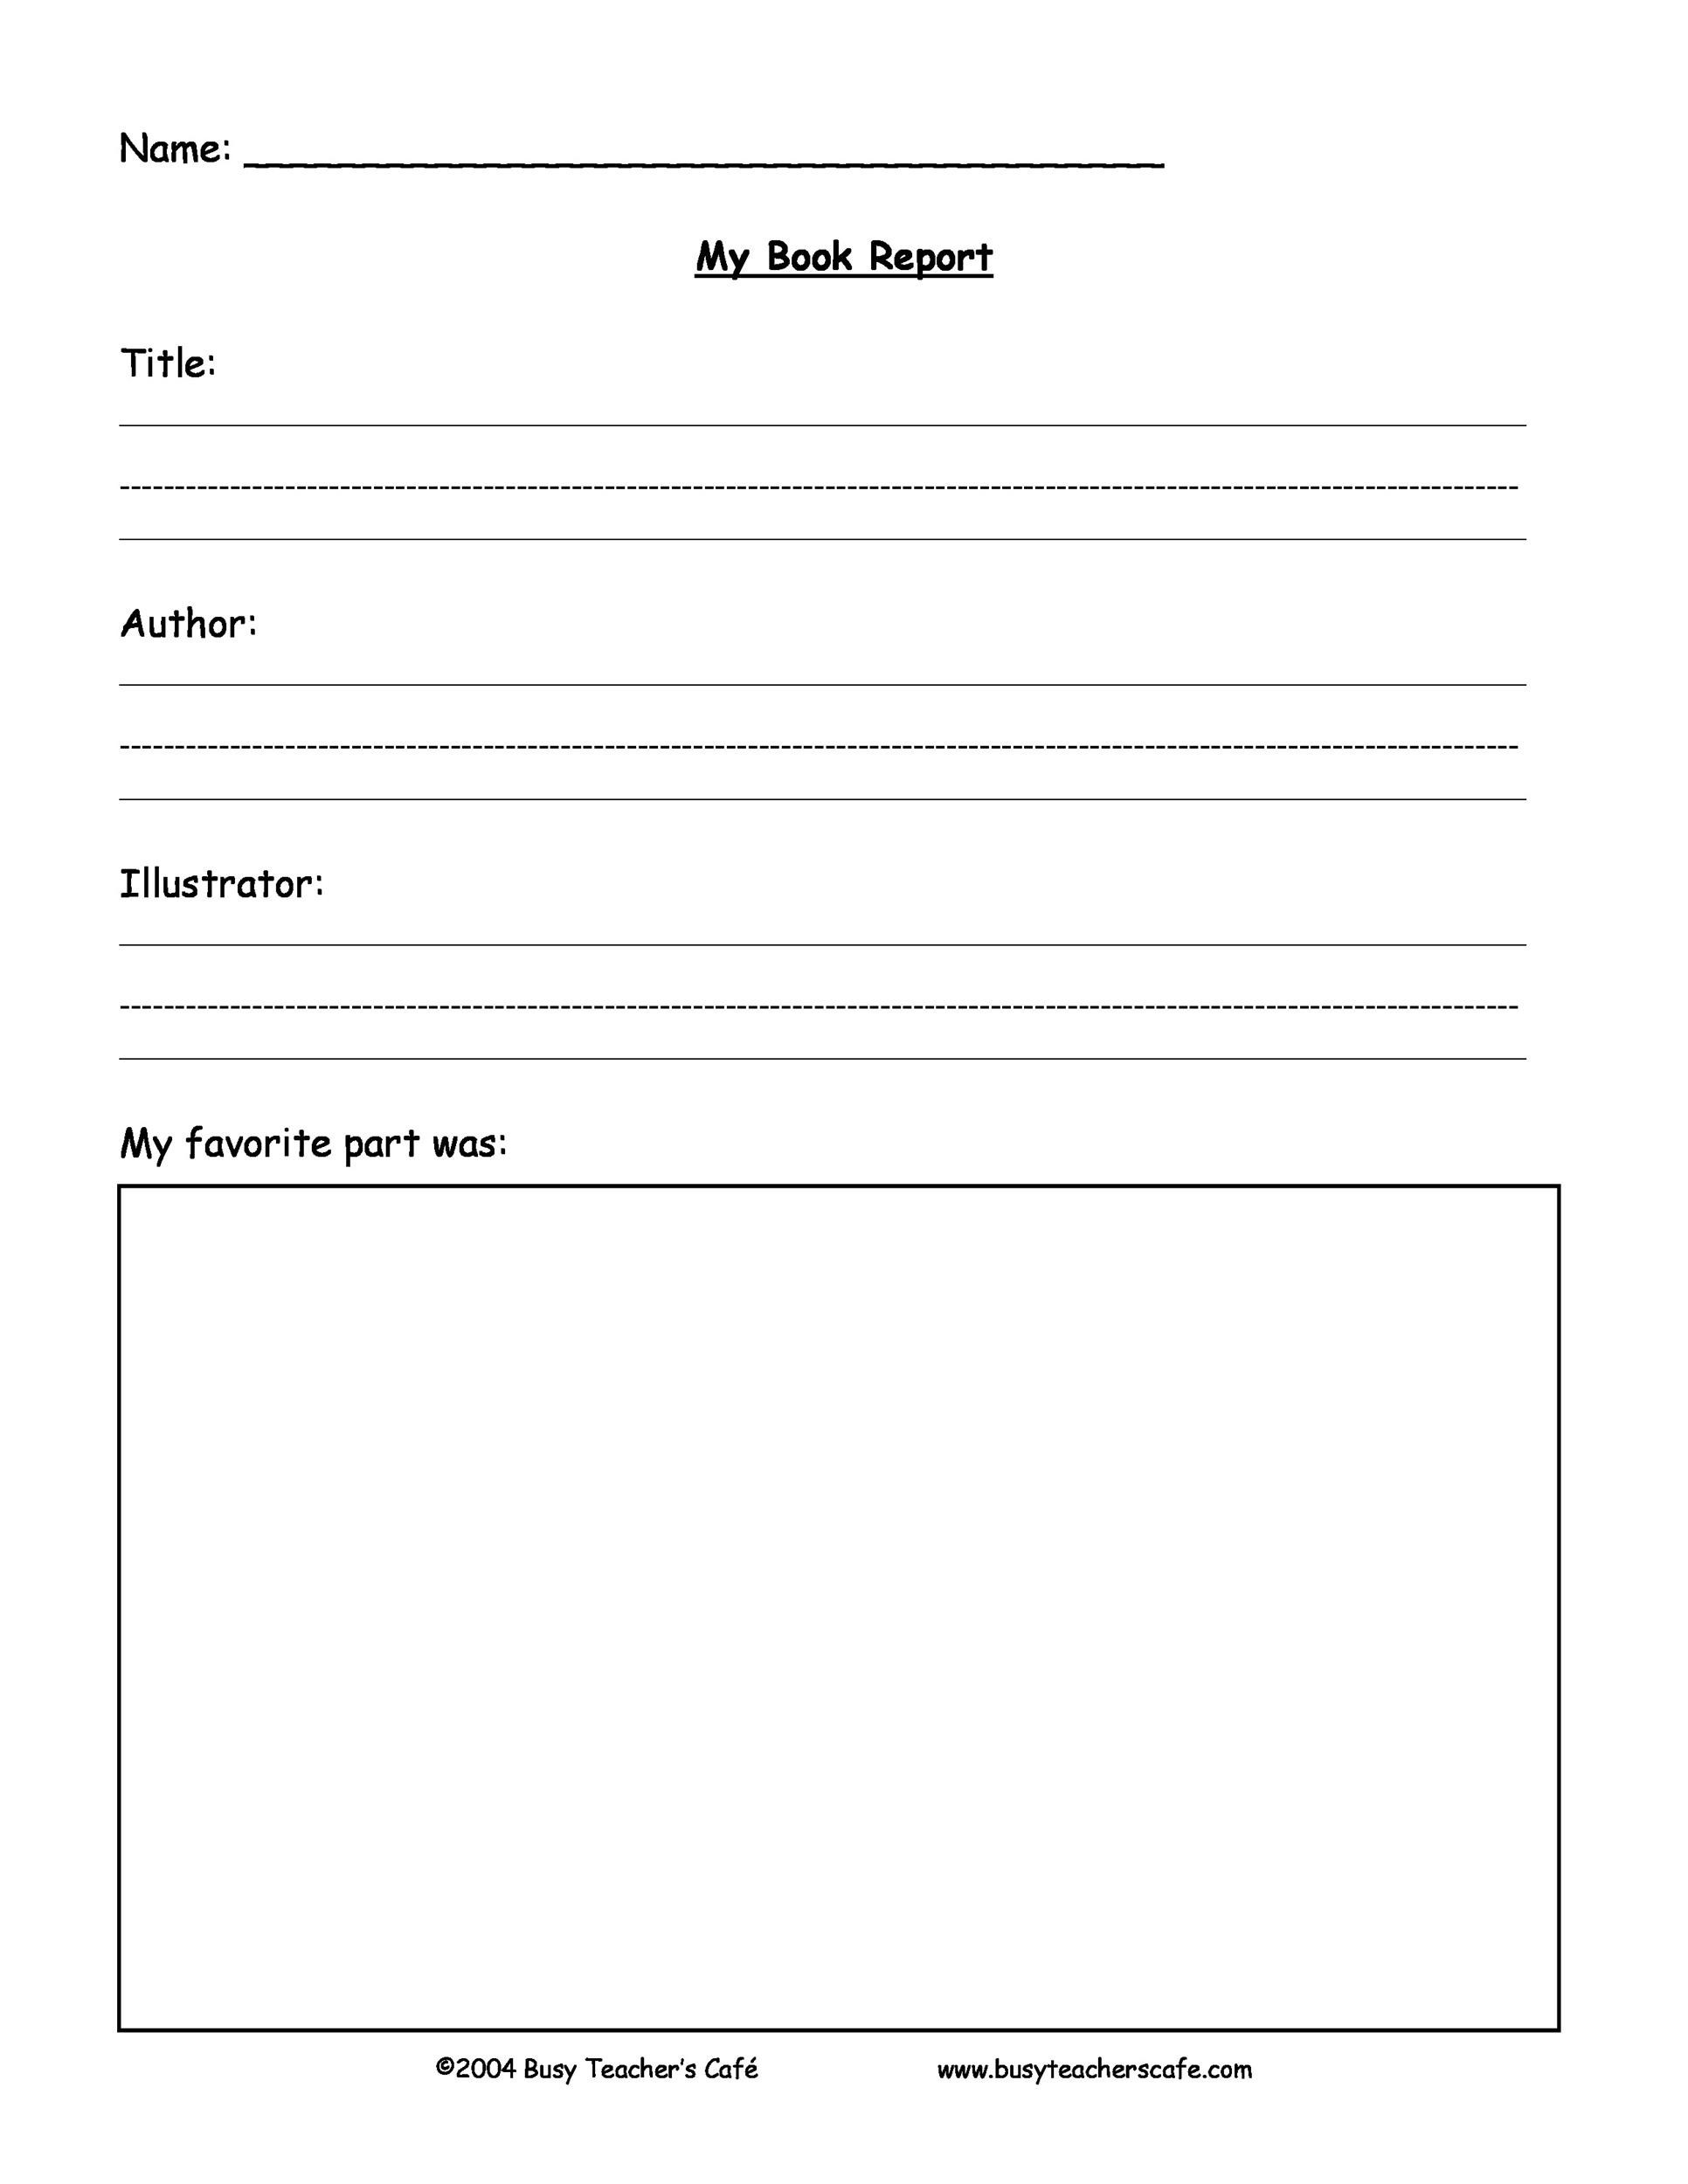 Free Book Report Template 30